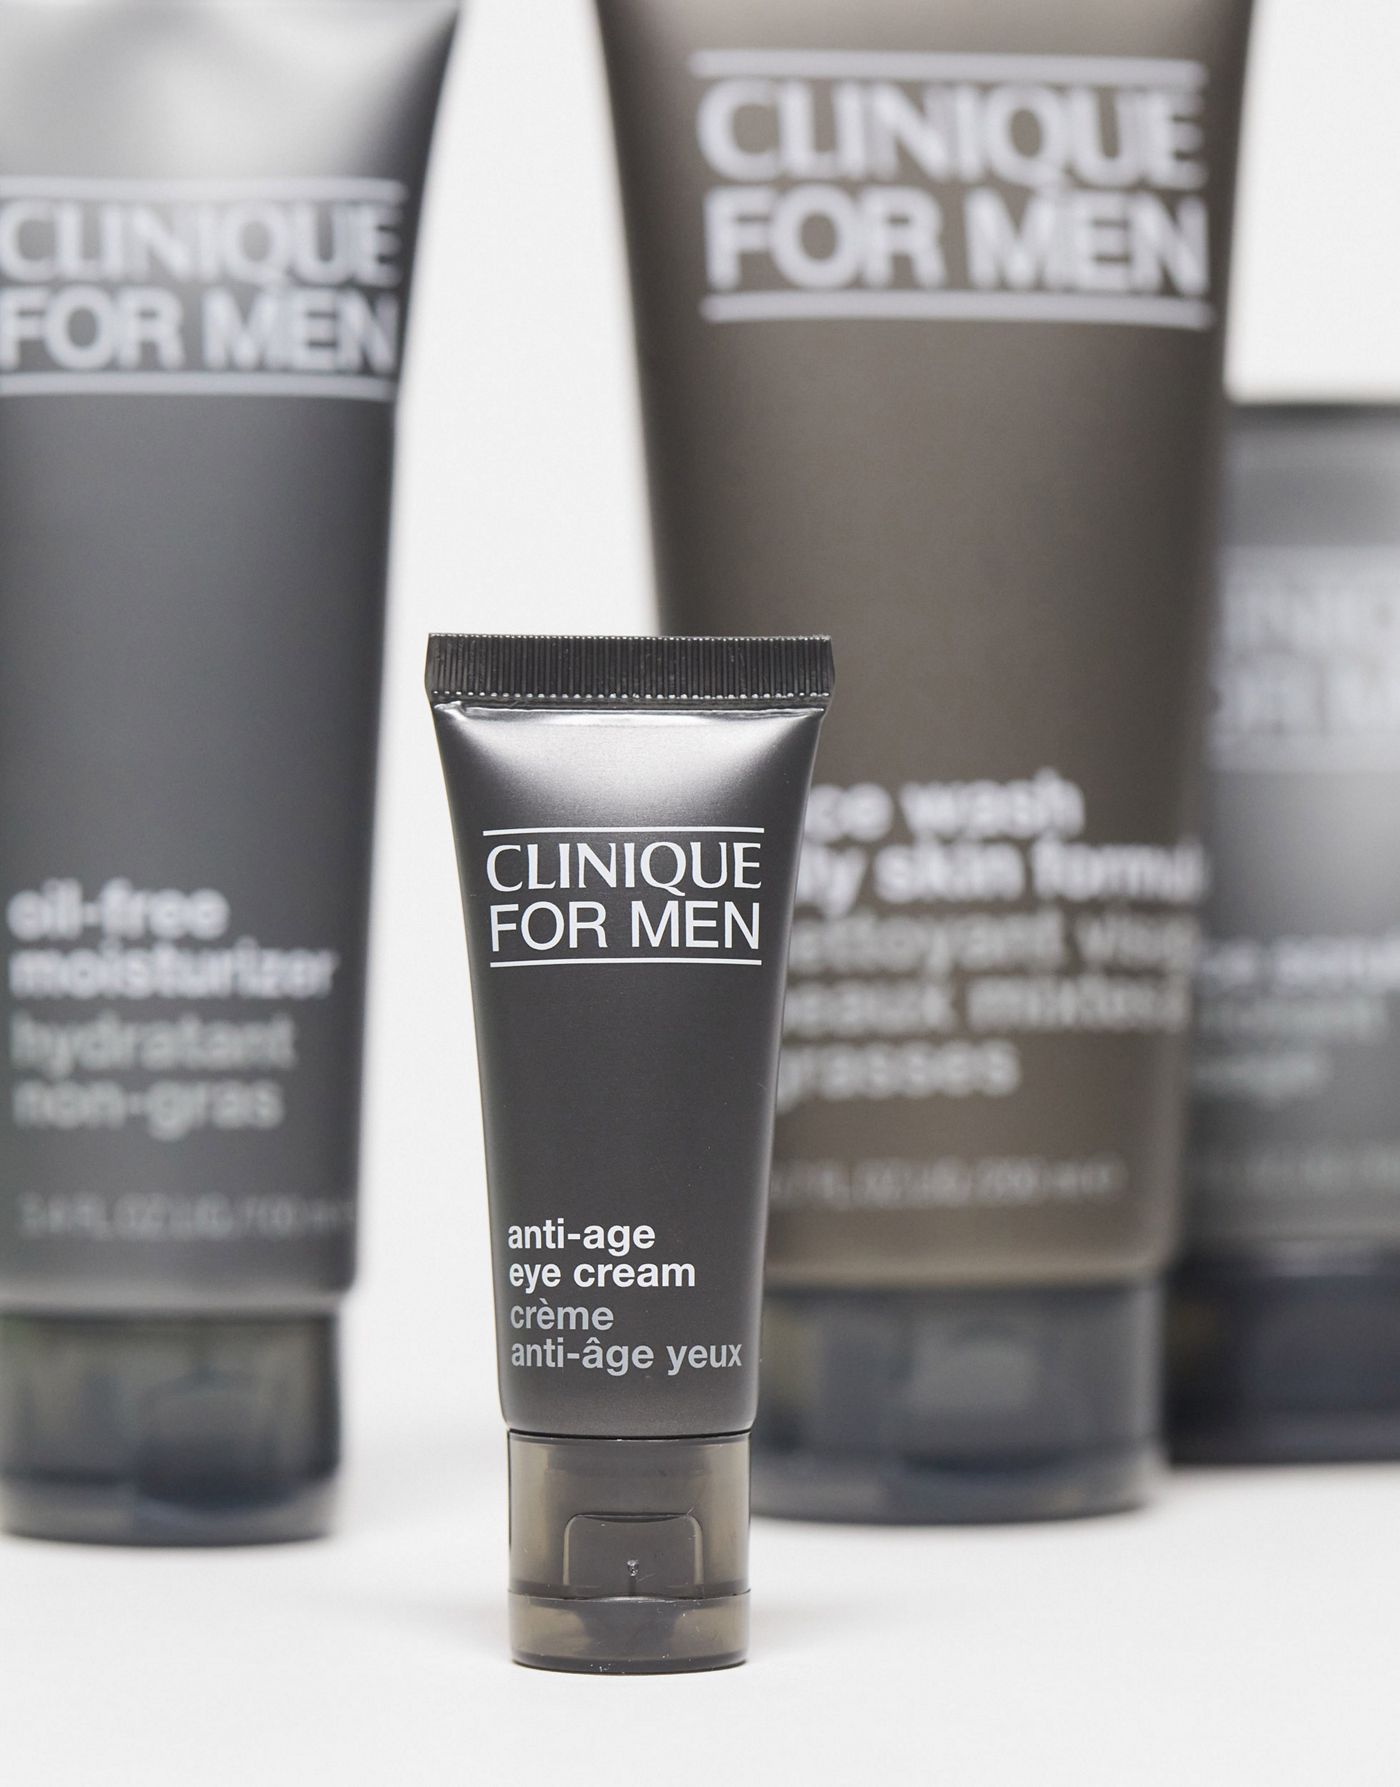 Clinique For Men Skincare Essentials Gift Set For Oily Skin Types (save 15%)